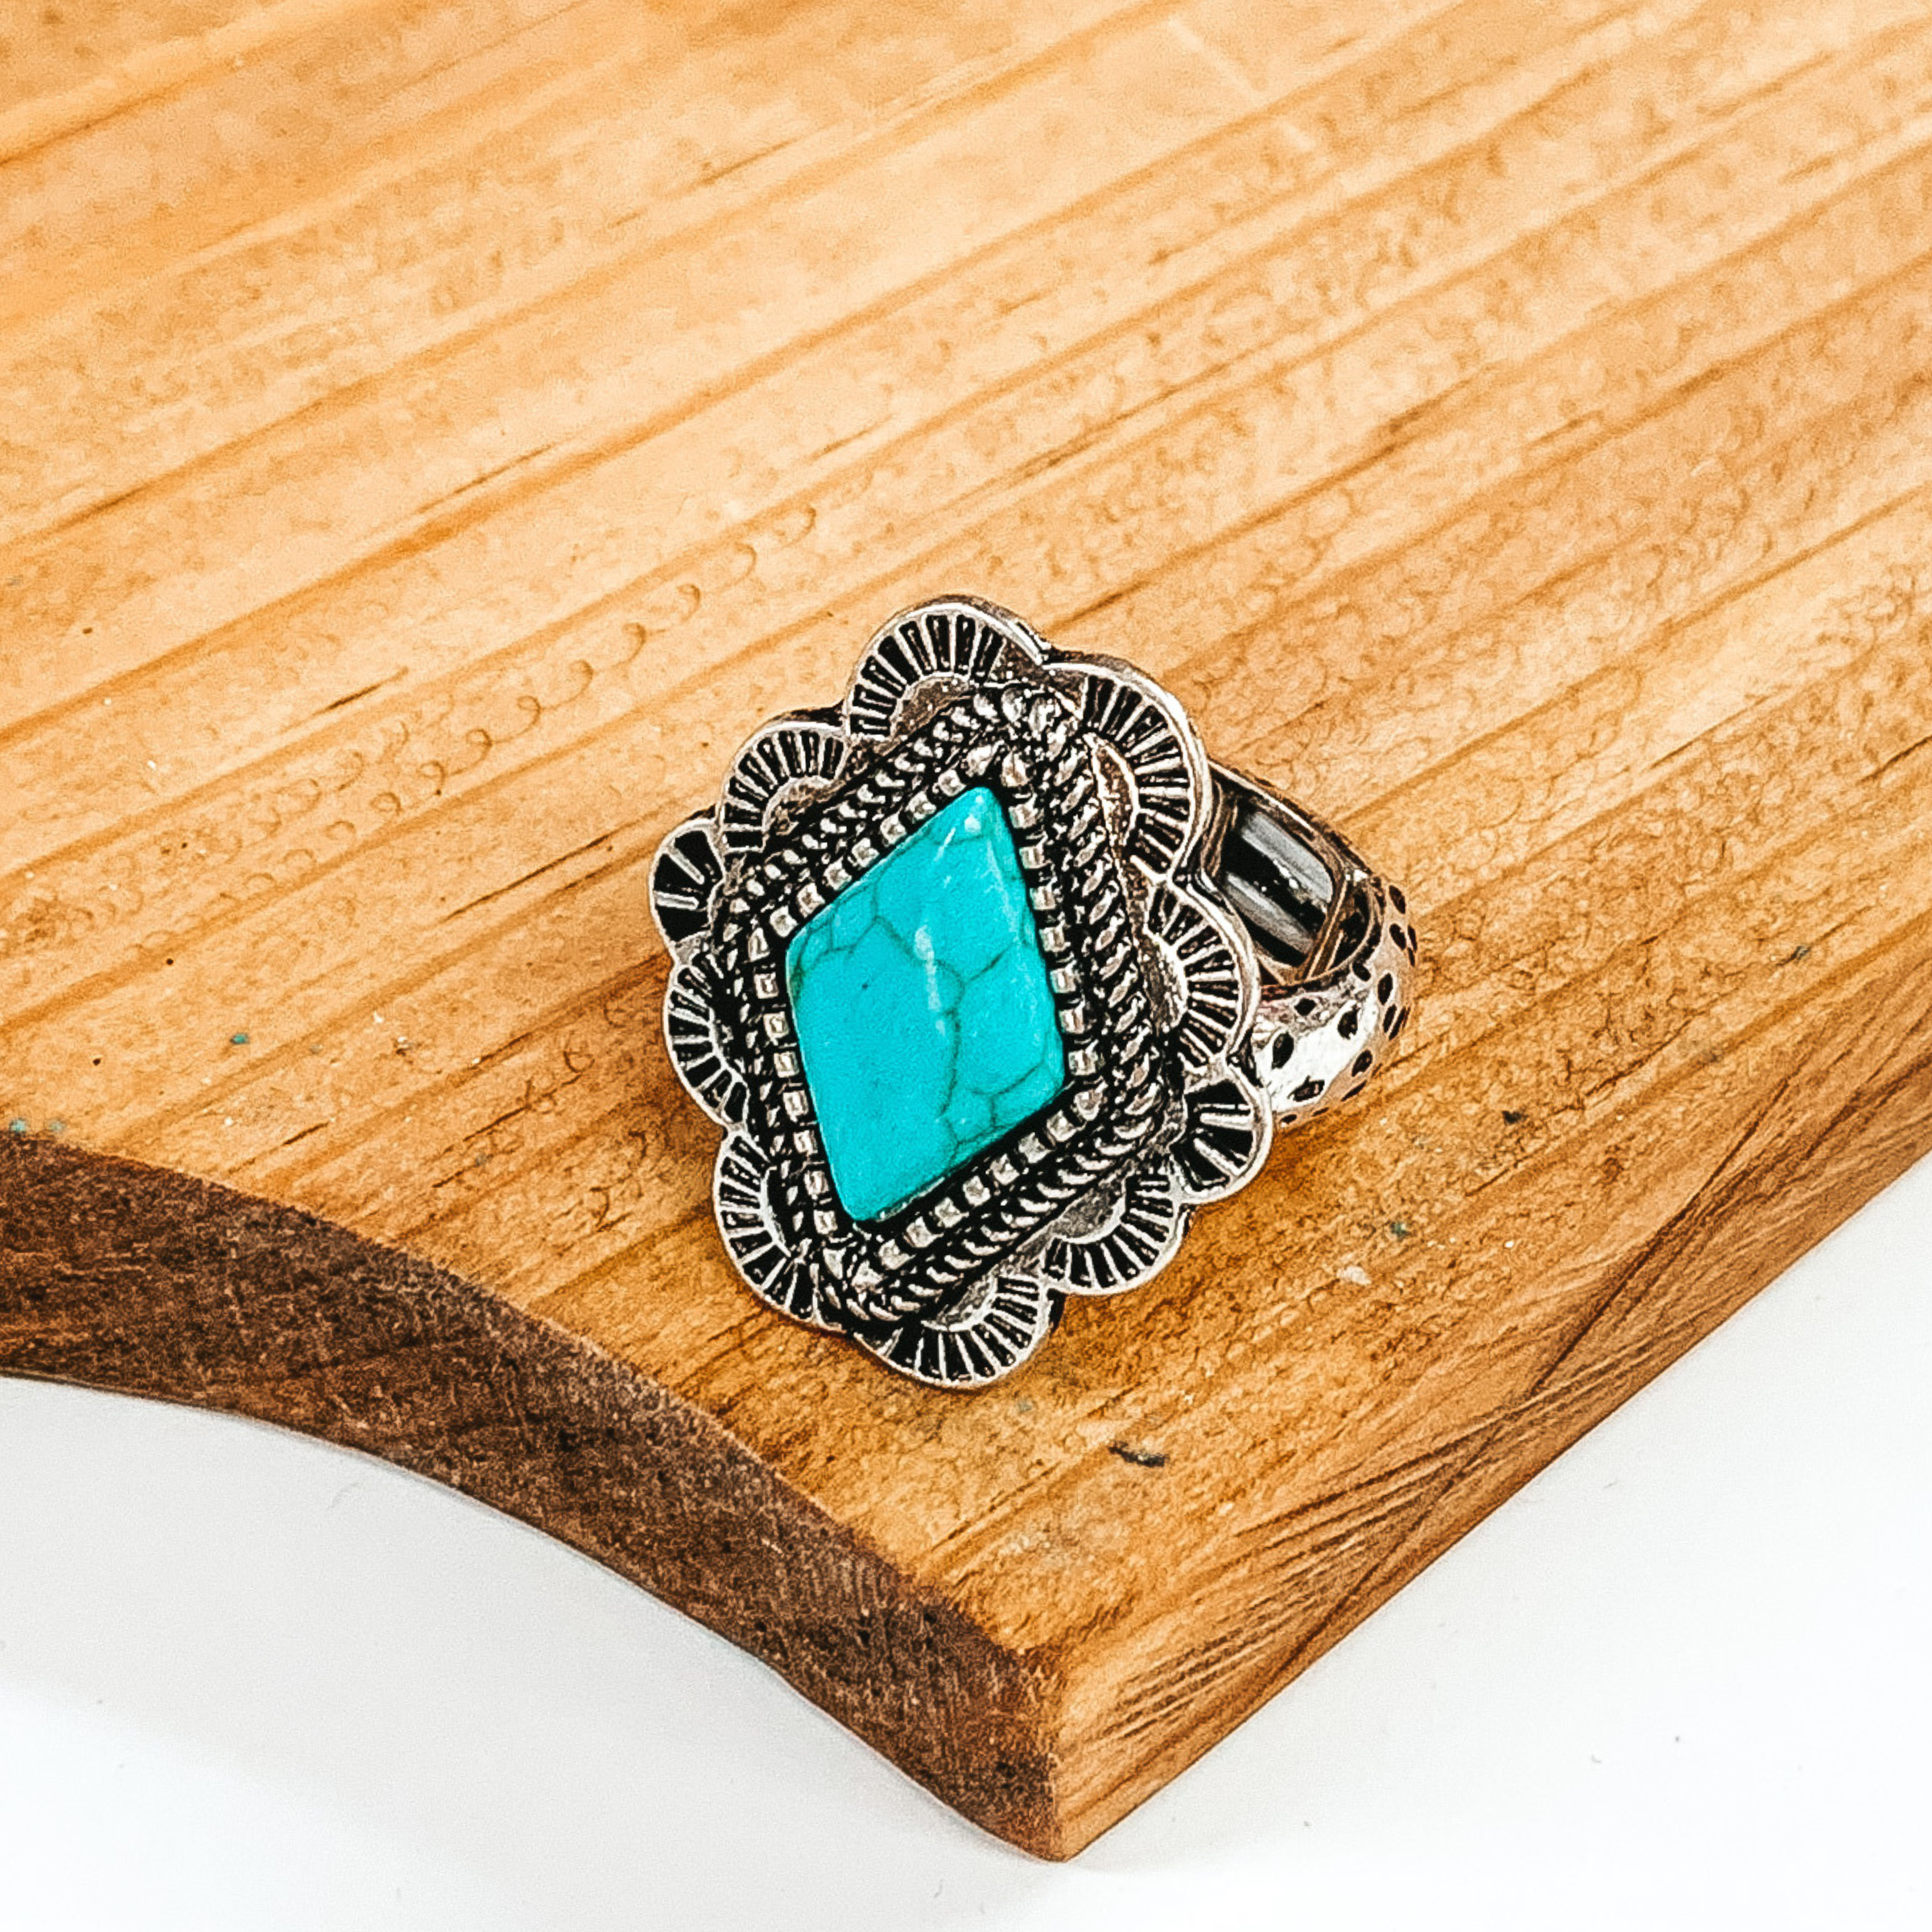 Silver stretchy ring that has a silver, rounded, diamond pendant with engraving detailing. In the center of the pendant, there is a turquoise diamond stone. This ring is pictured laying on a brown block on a white background.